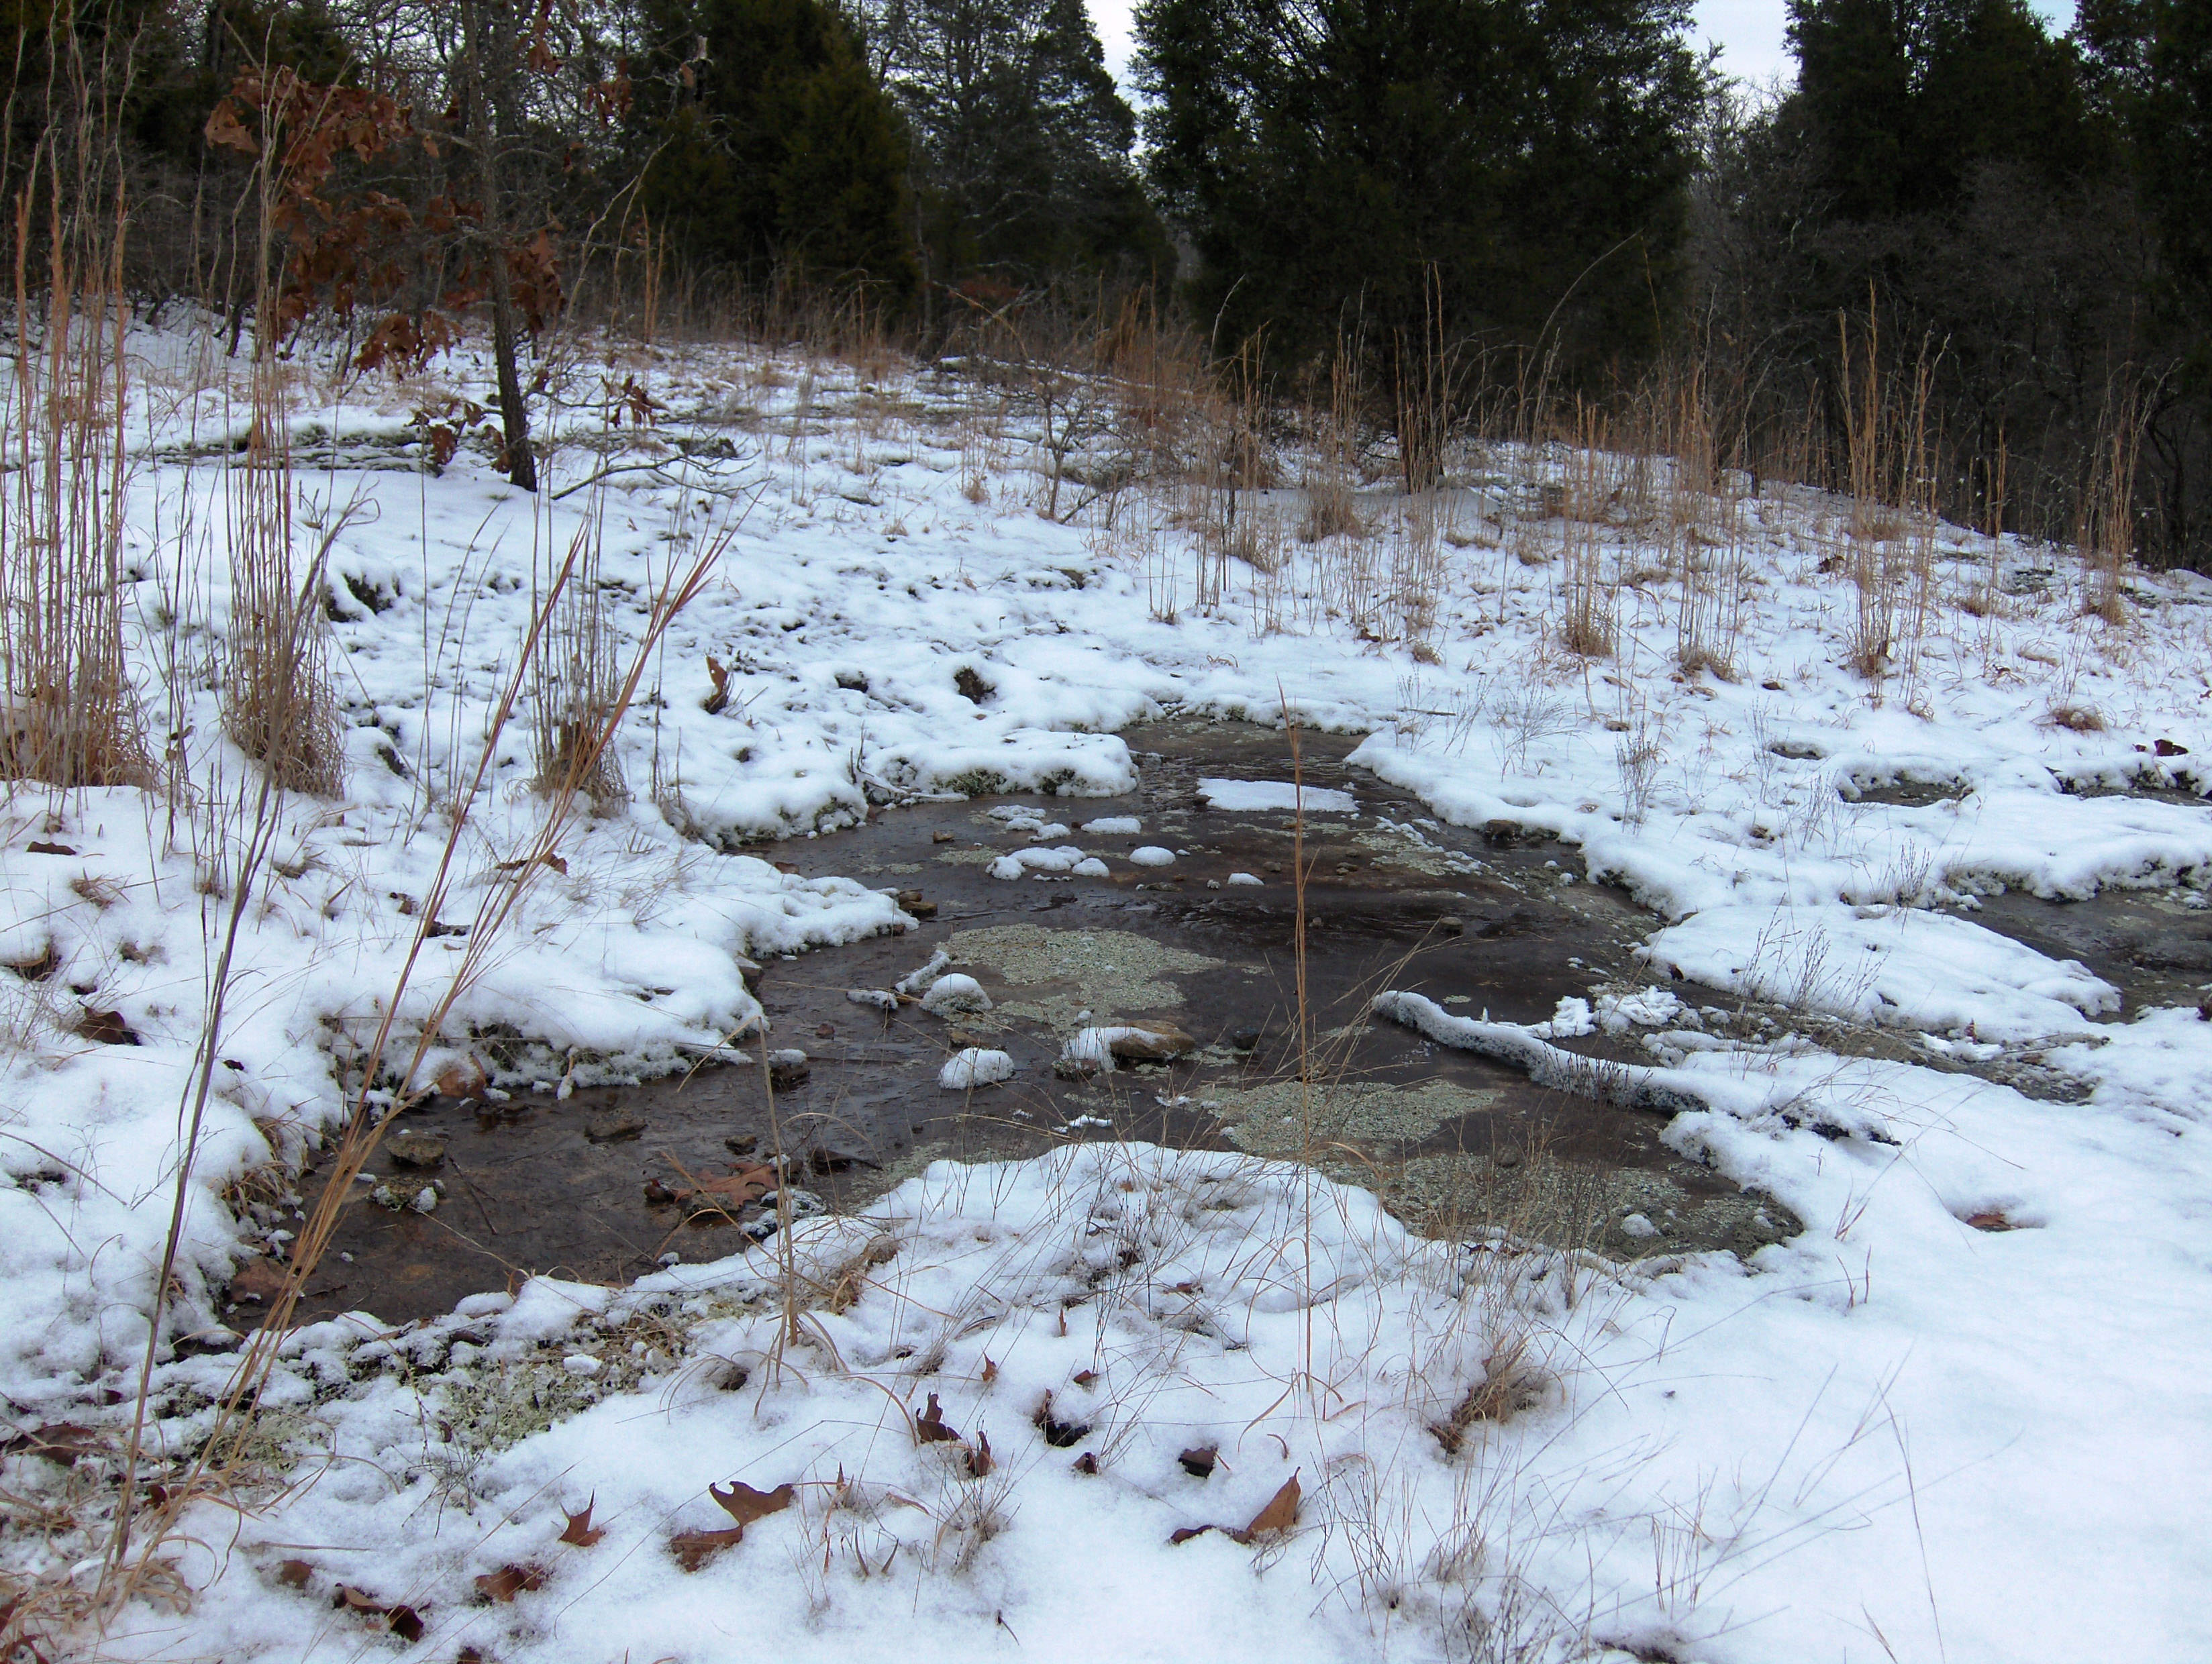 A wetland emerges from a snowy area.